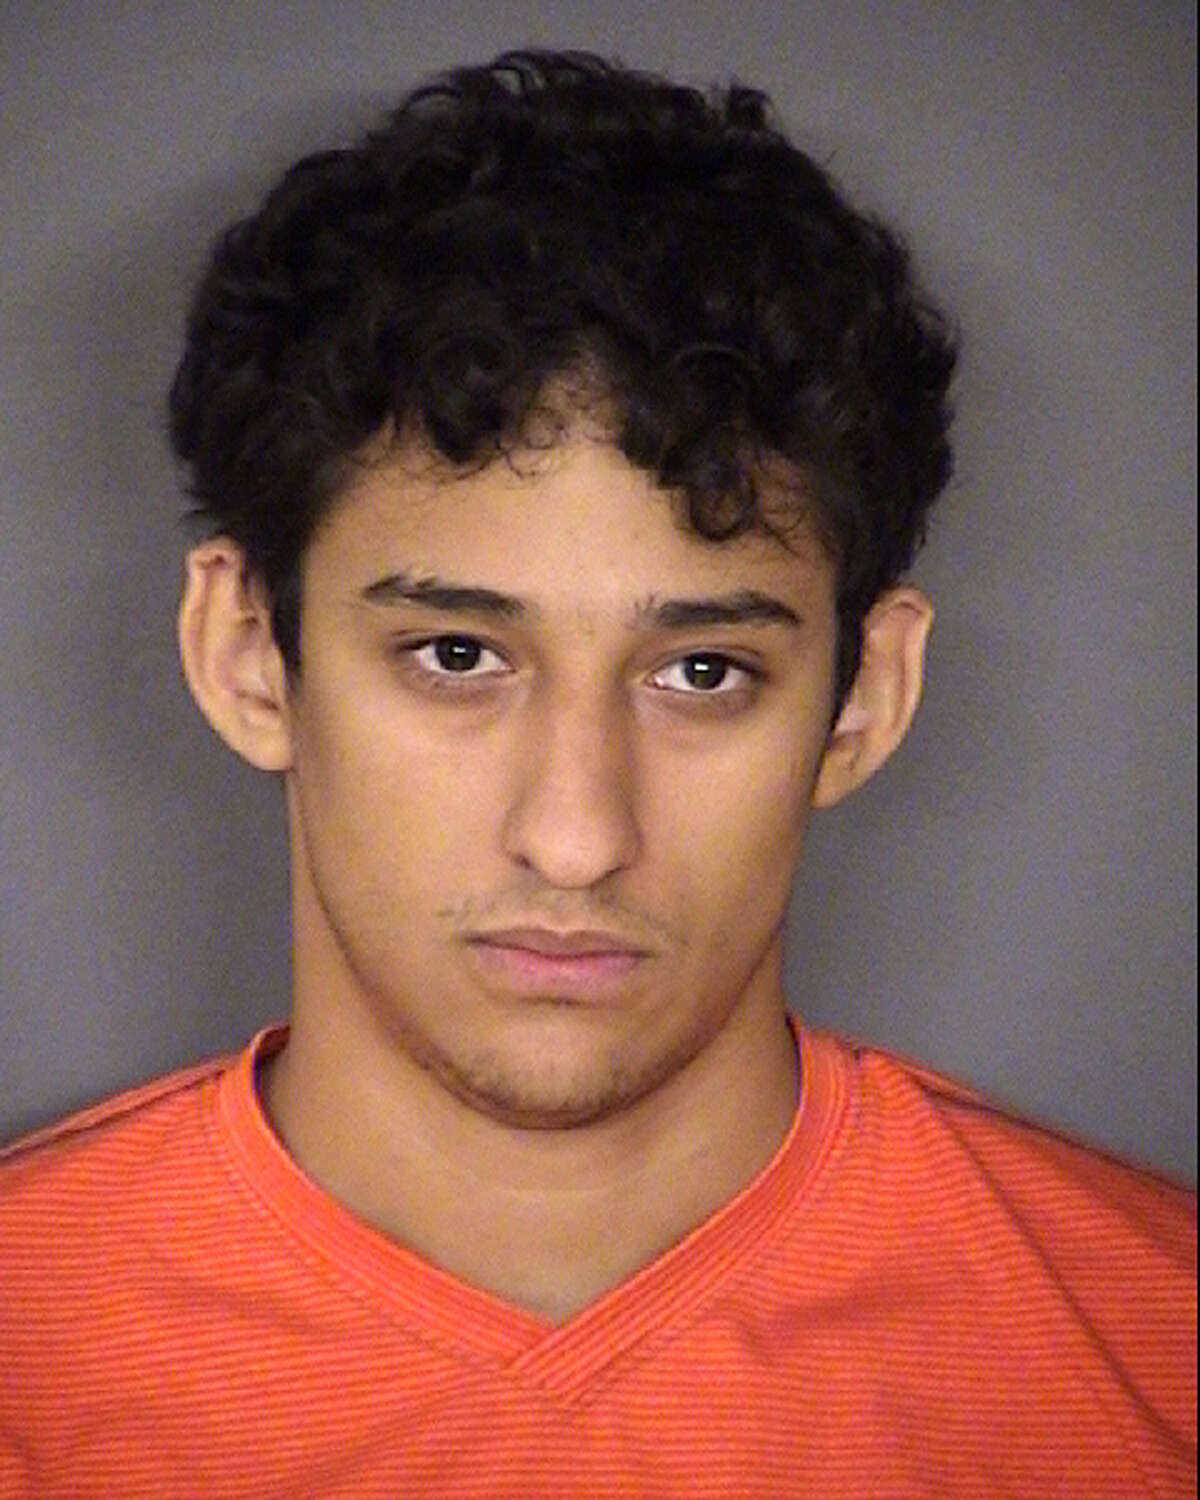 Gilbert Deleon, 19, faces a charge of aggravated assault of a public servant. He remains in the Bexar County Jail on a $30,000 bond.